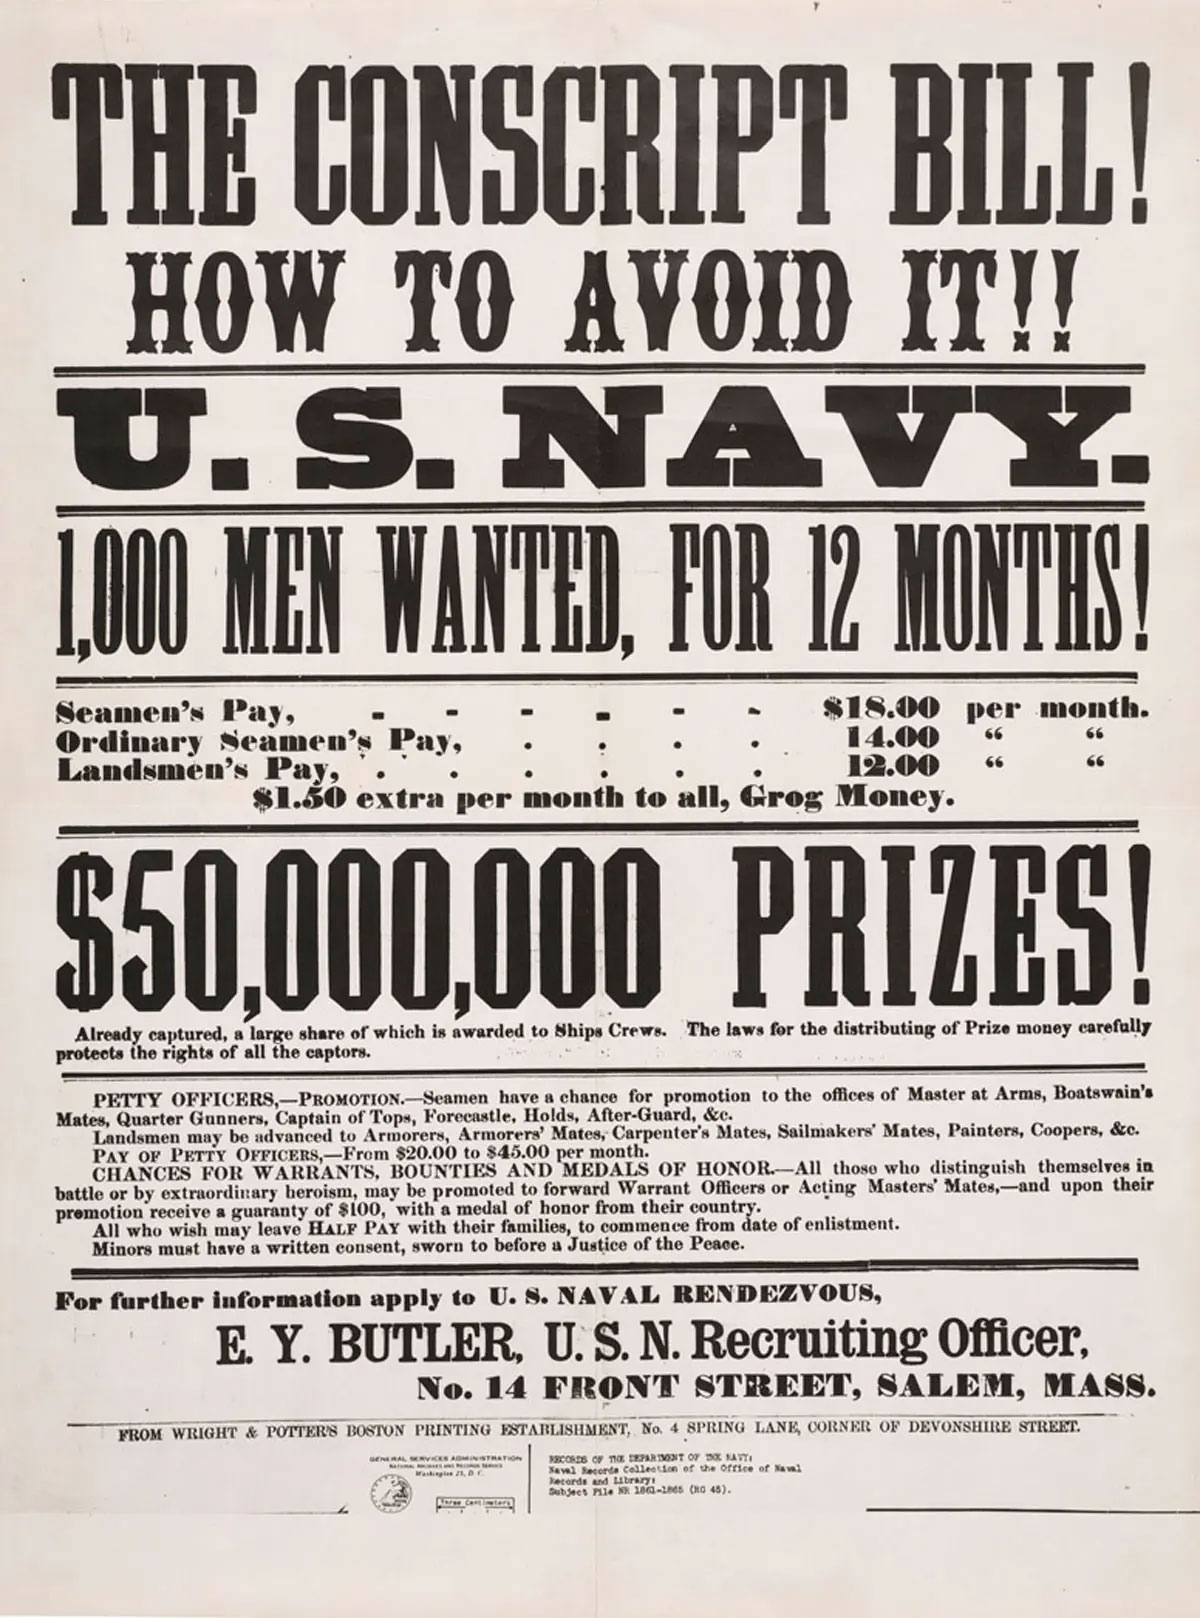 The U.S. Navy used the threat of the draft and the possibility of prize money to encourage men to enlist